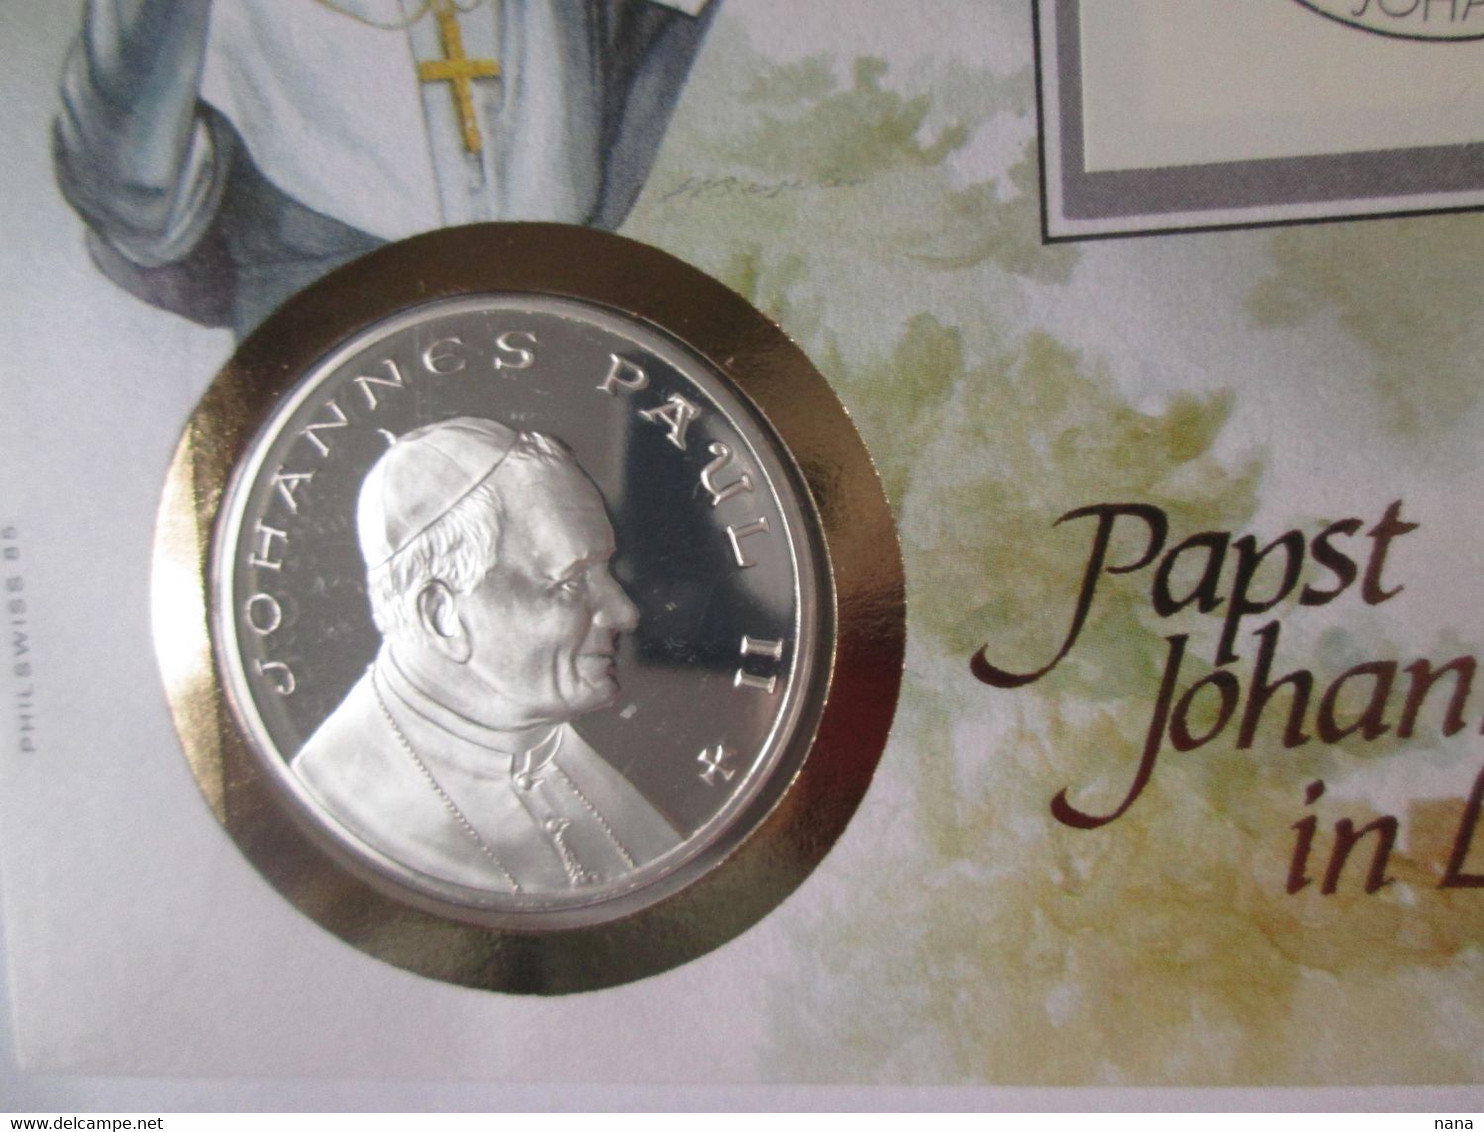 The Pope Johannes Paul II In Liechtenstein 1985 Envelope With Silver Commemorative Medal 999.9 Limited Edition 4000 Pc. - Briefe U. Dokumente